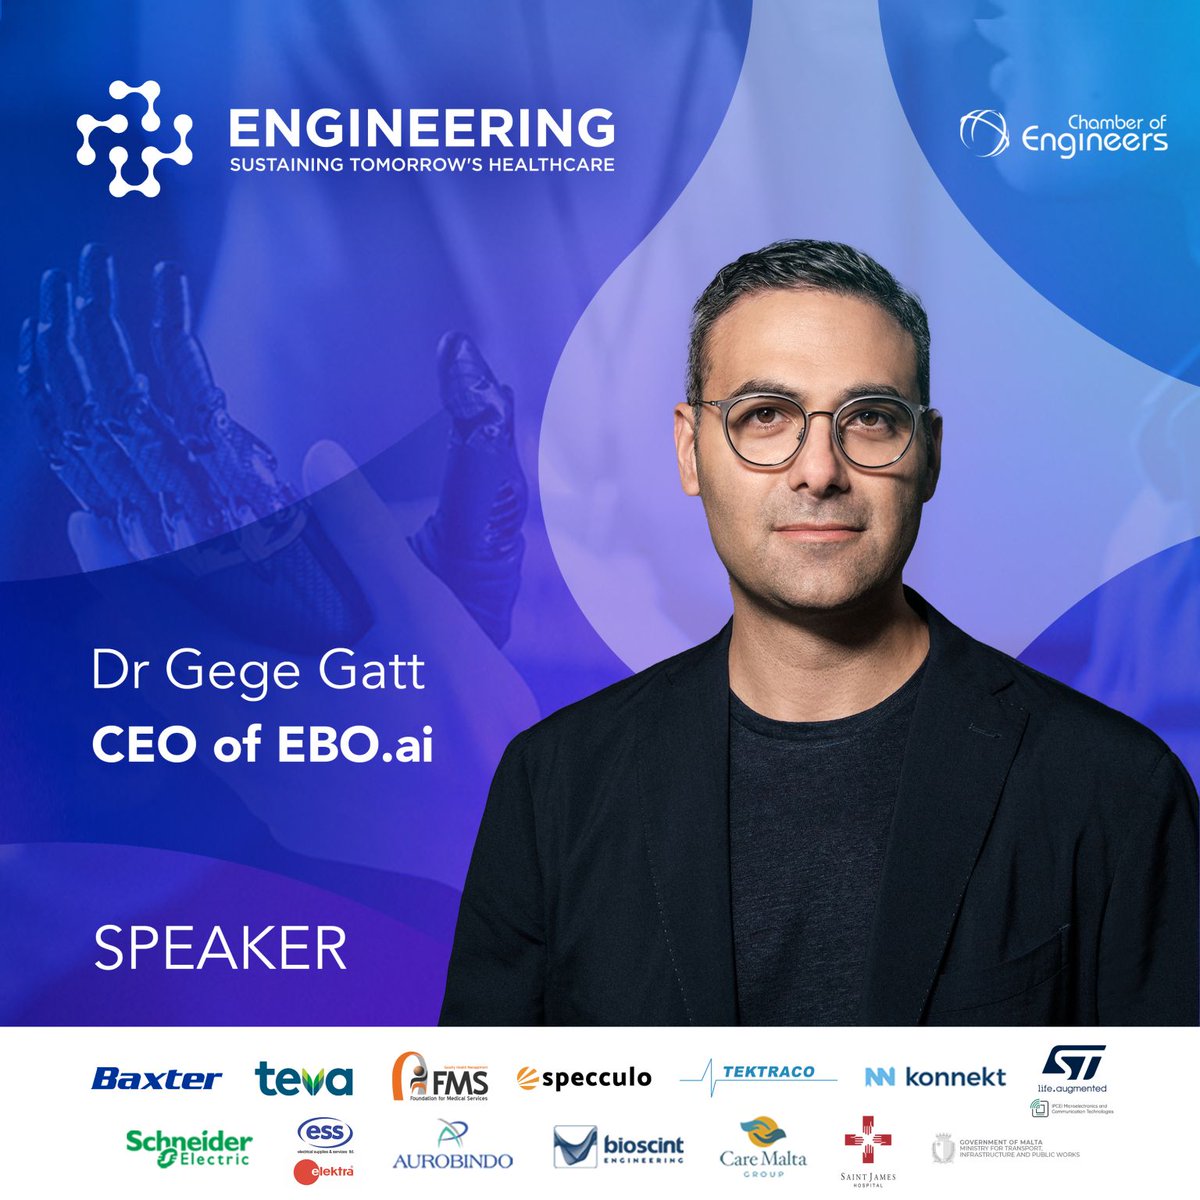 Thrilled to speak at the 31st Annual Engineering Conference by Chamber of Engineers! 🏥 Join us on May 8th at Grand Hotel Excelsior, Floriana. #EngineeringHealth #AIHealthcare #EngineeringConference2024 ➡️ Register: coe.org.mt/2024/04/02/con…